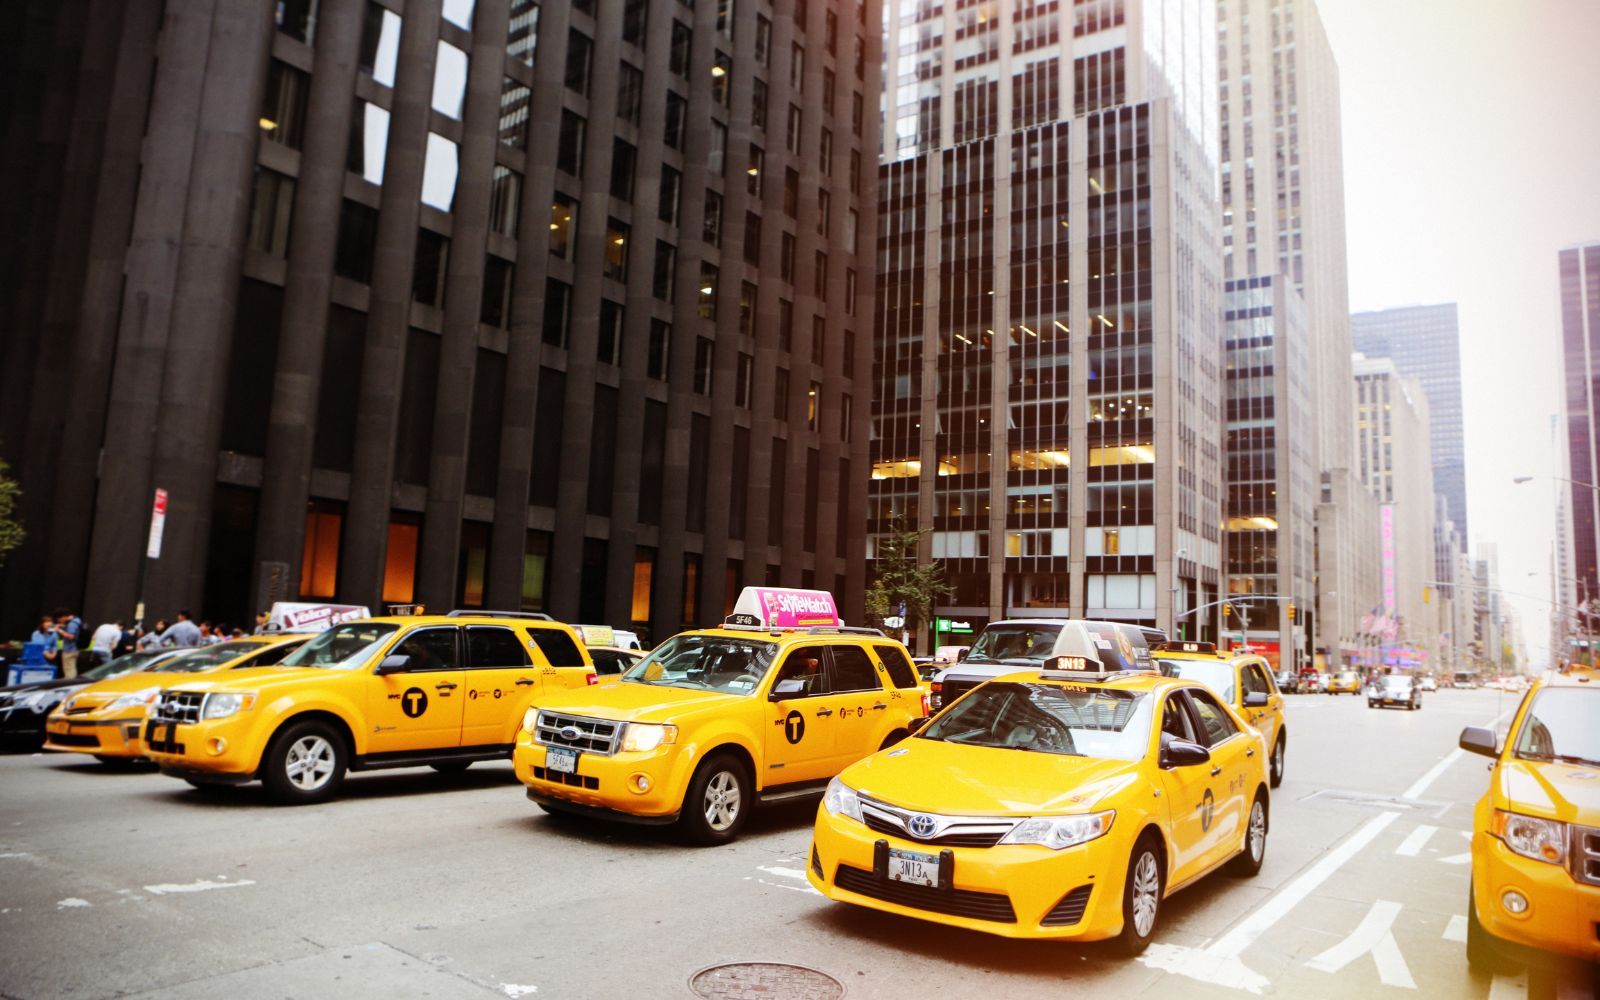 Taxi Company Slogans with Global Reach.